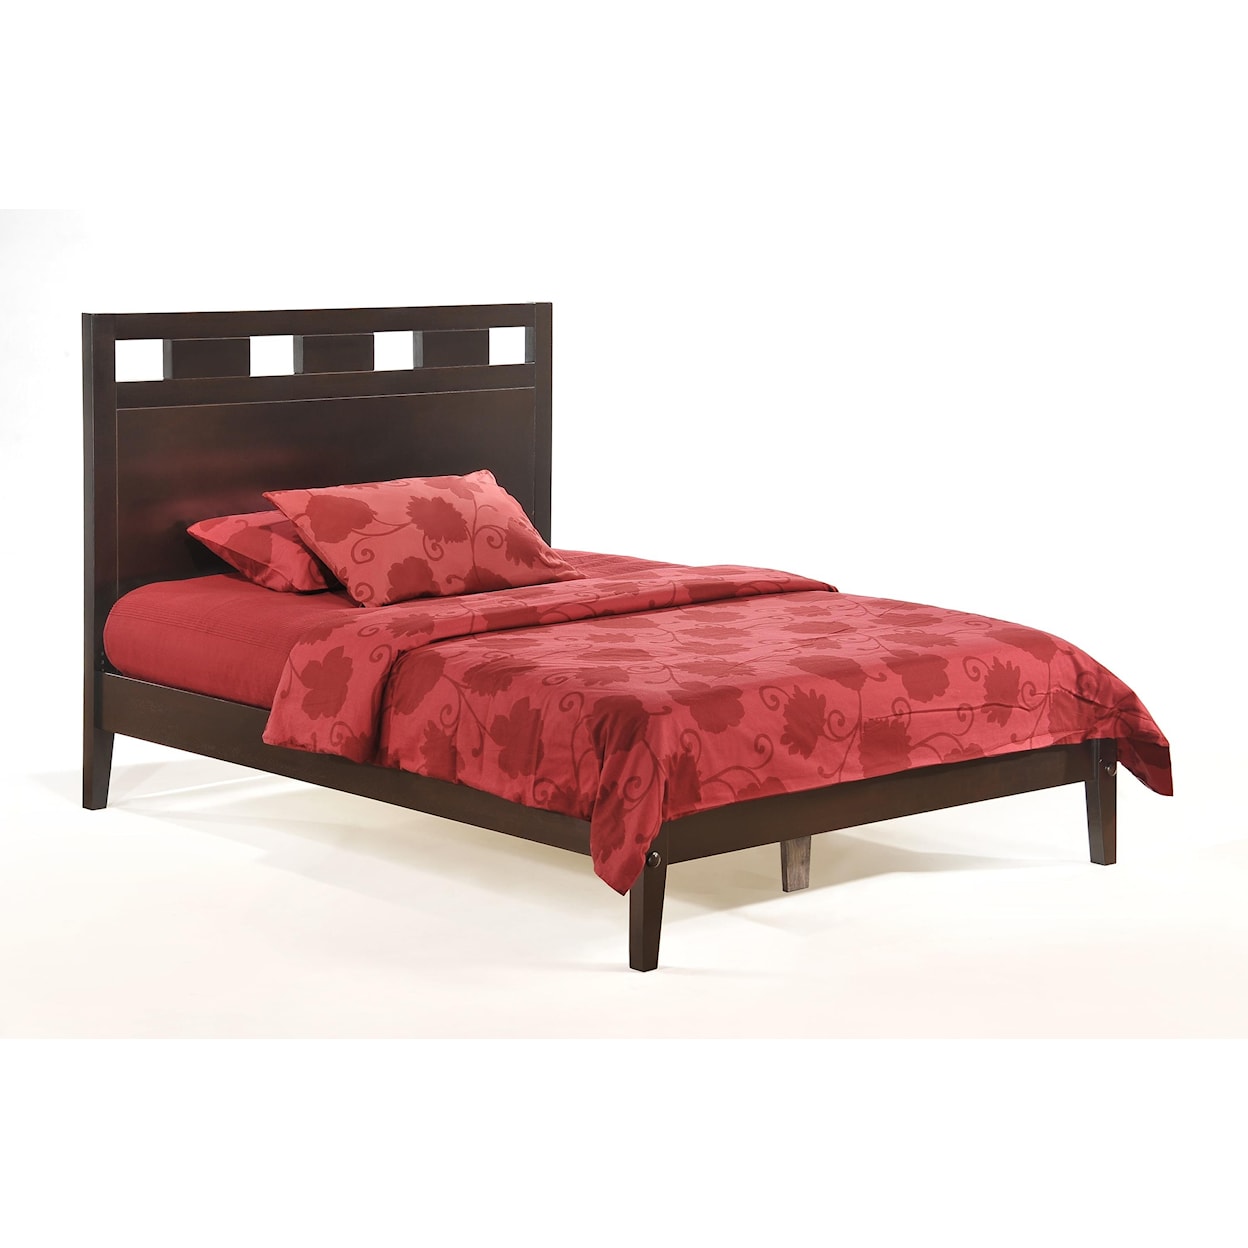 Pacific Manufacturing Tamarind Twin Bed